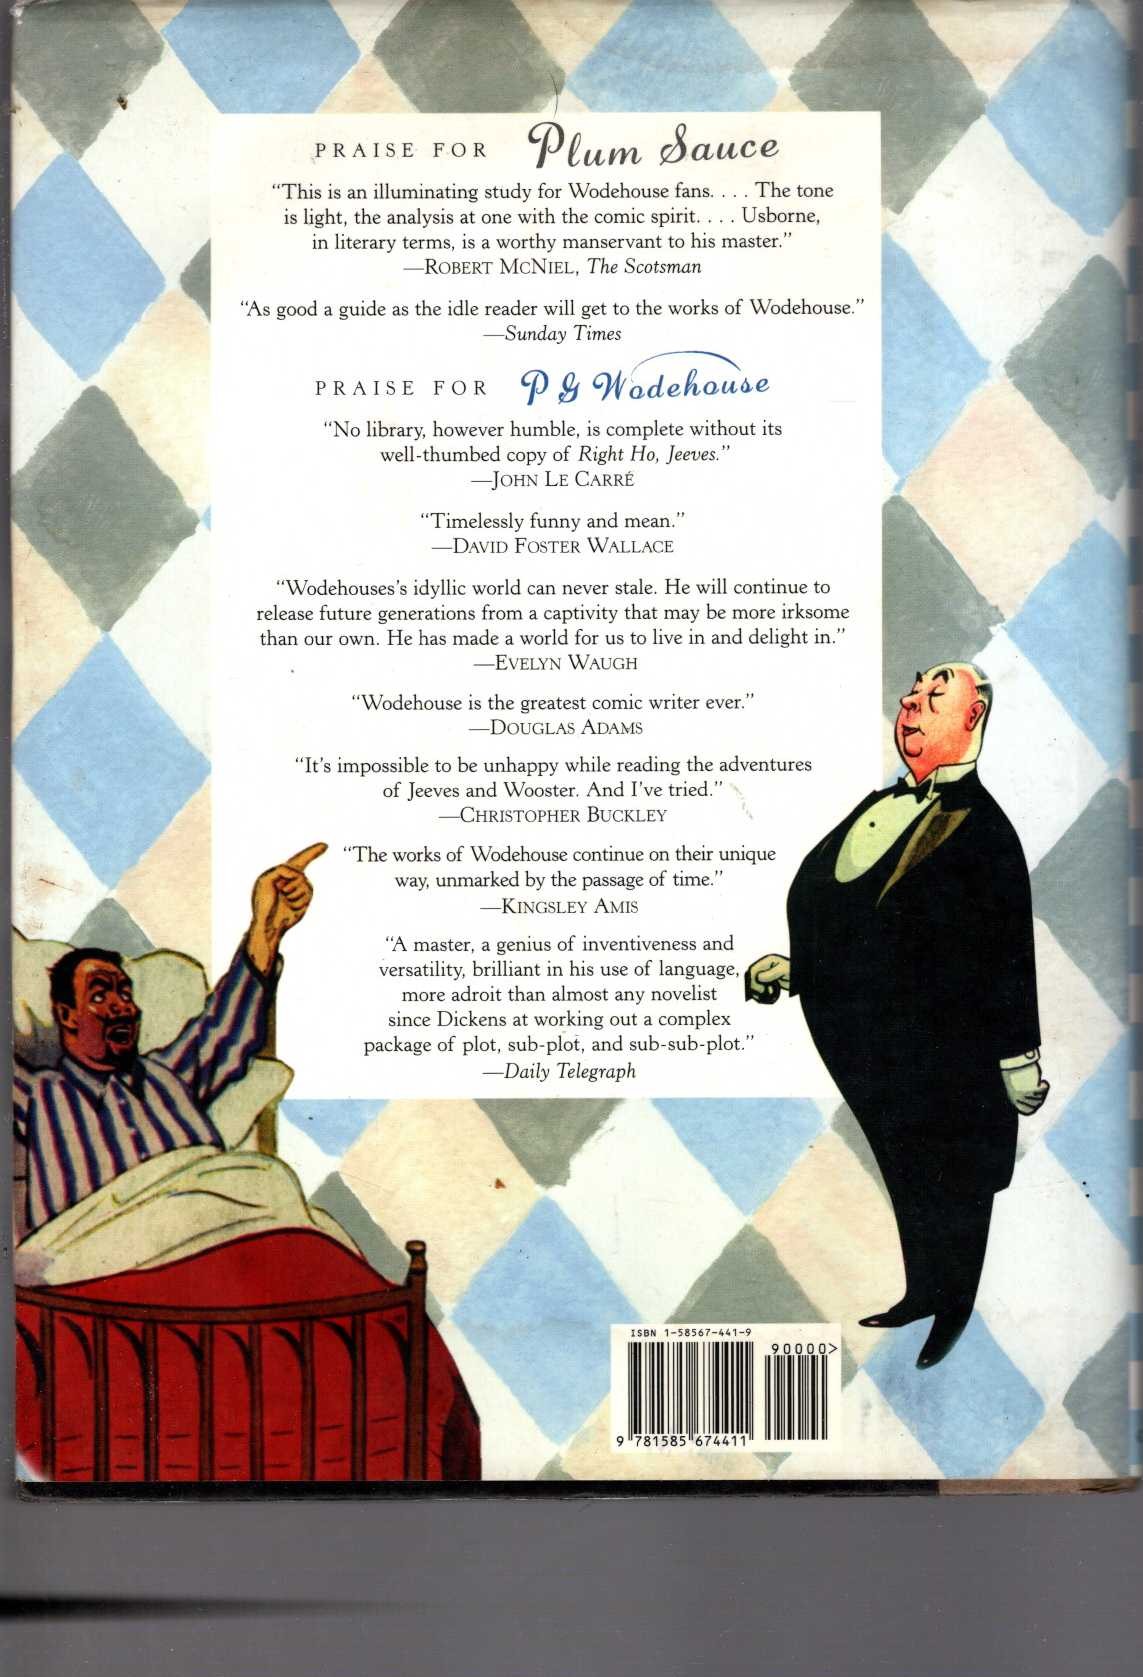 PLUM SAUCE. A P.G.WODEHOUSE COMPANION magnified rear book cover image